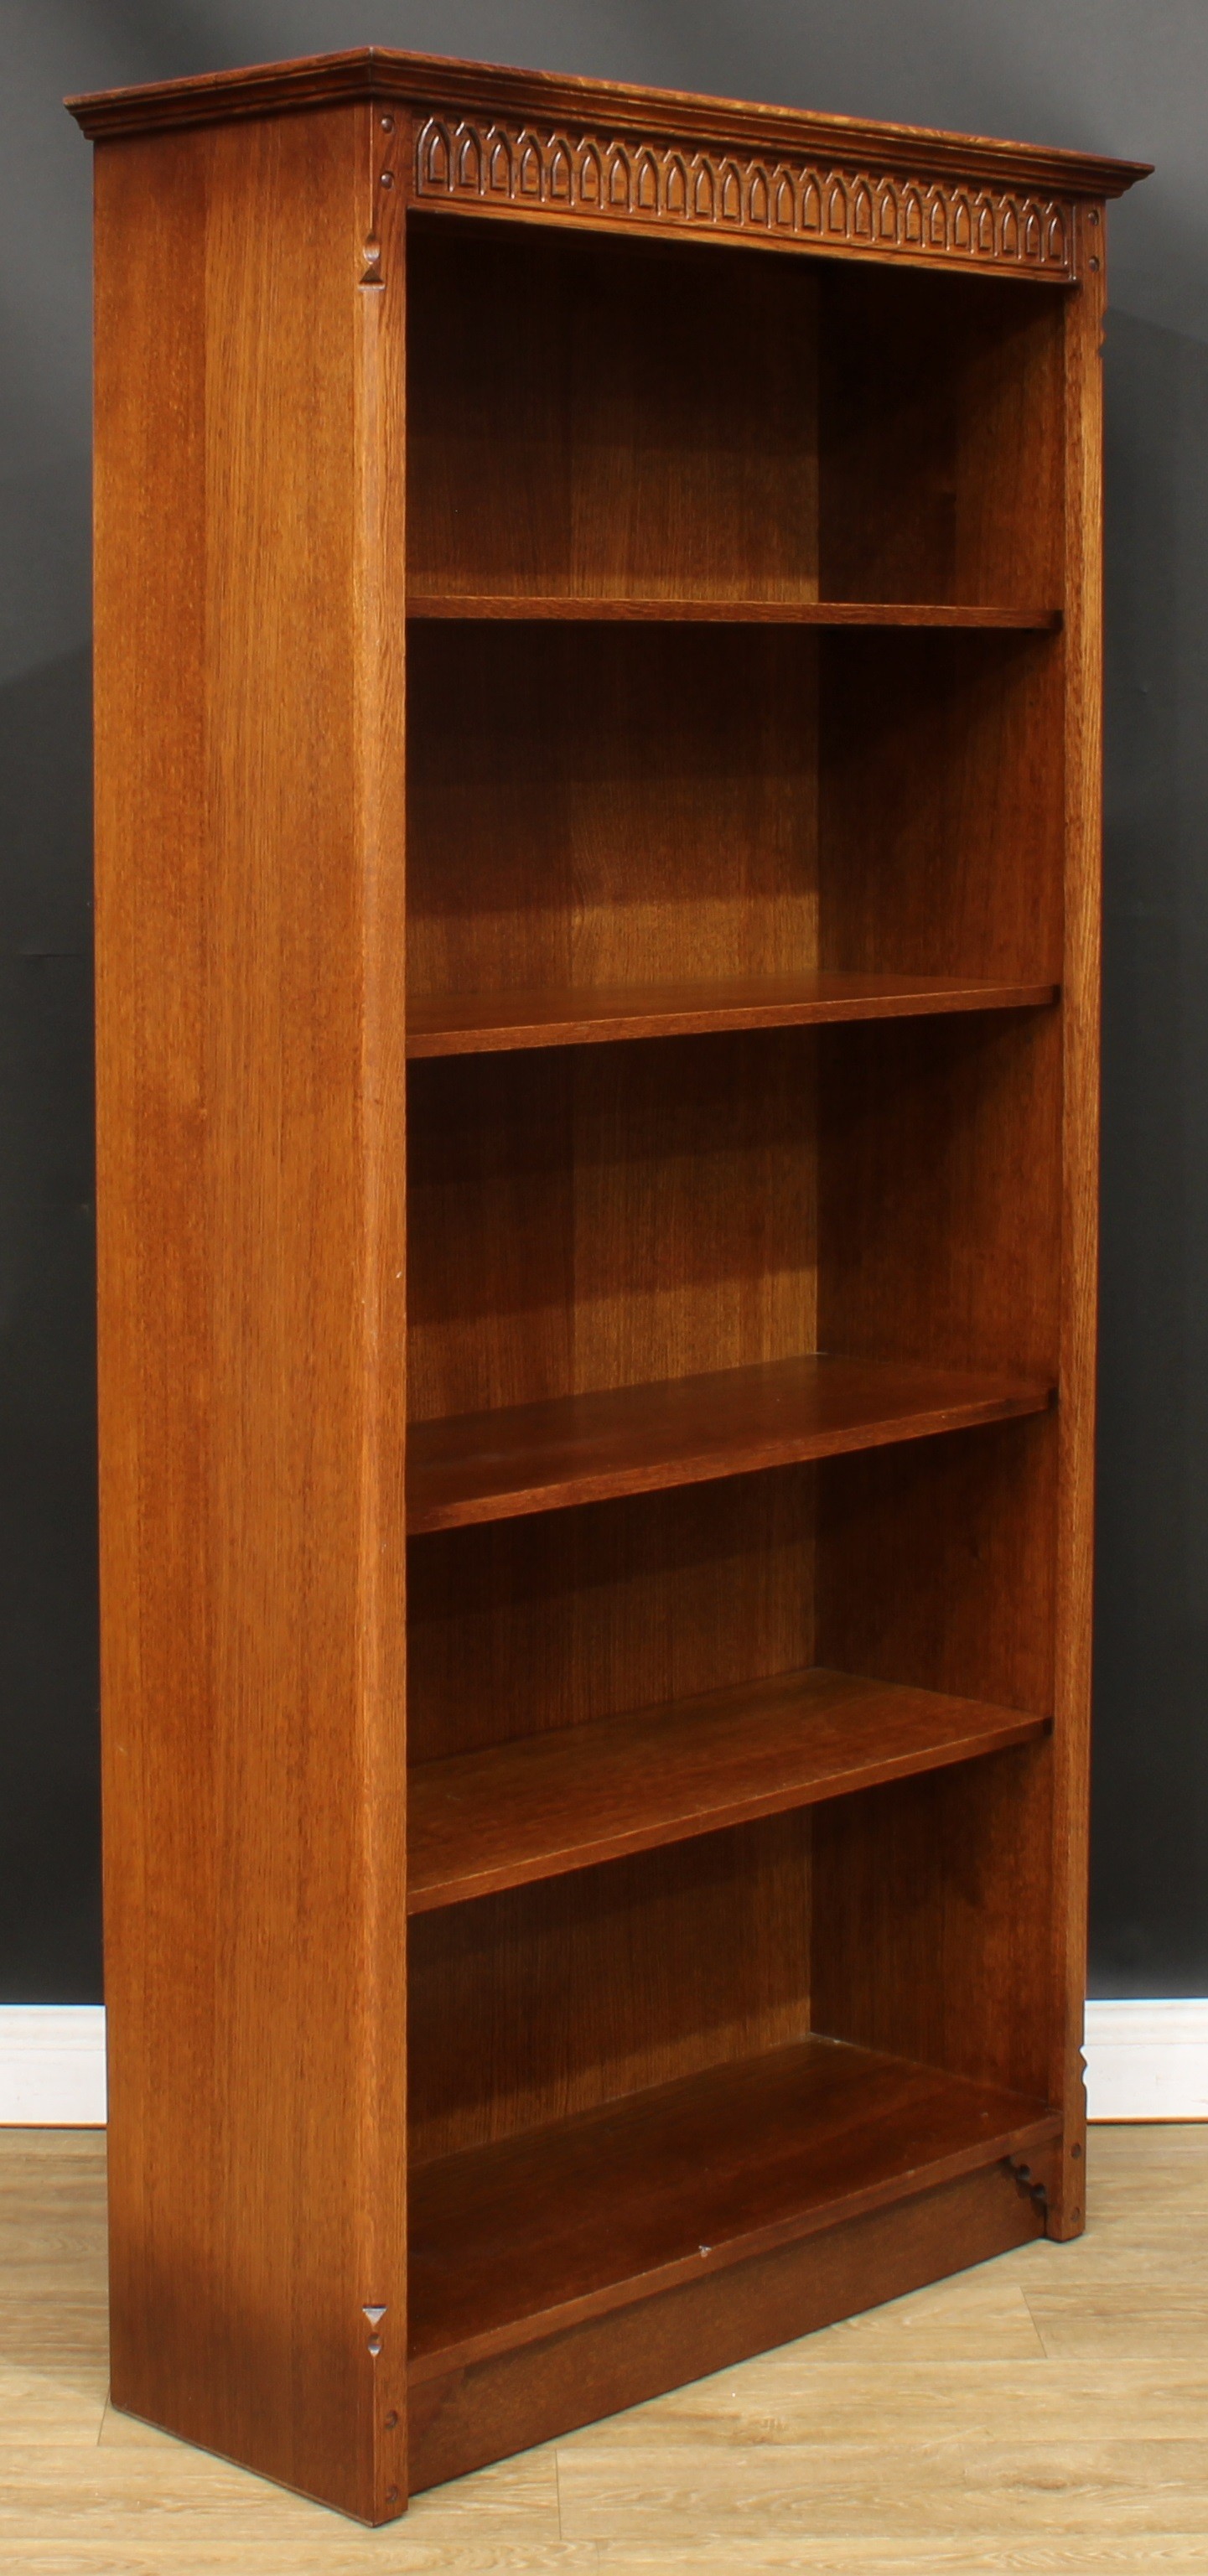 A tall oak open bookcase, carved frieze, 185cm high, 93.5cm wide, 35cm deep, the book depth 29cm - Image 2 of 2